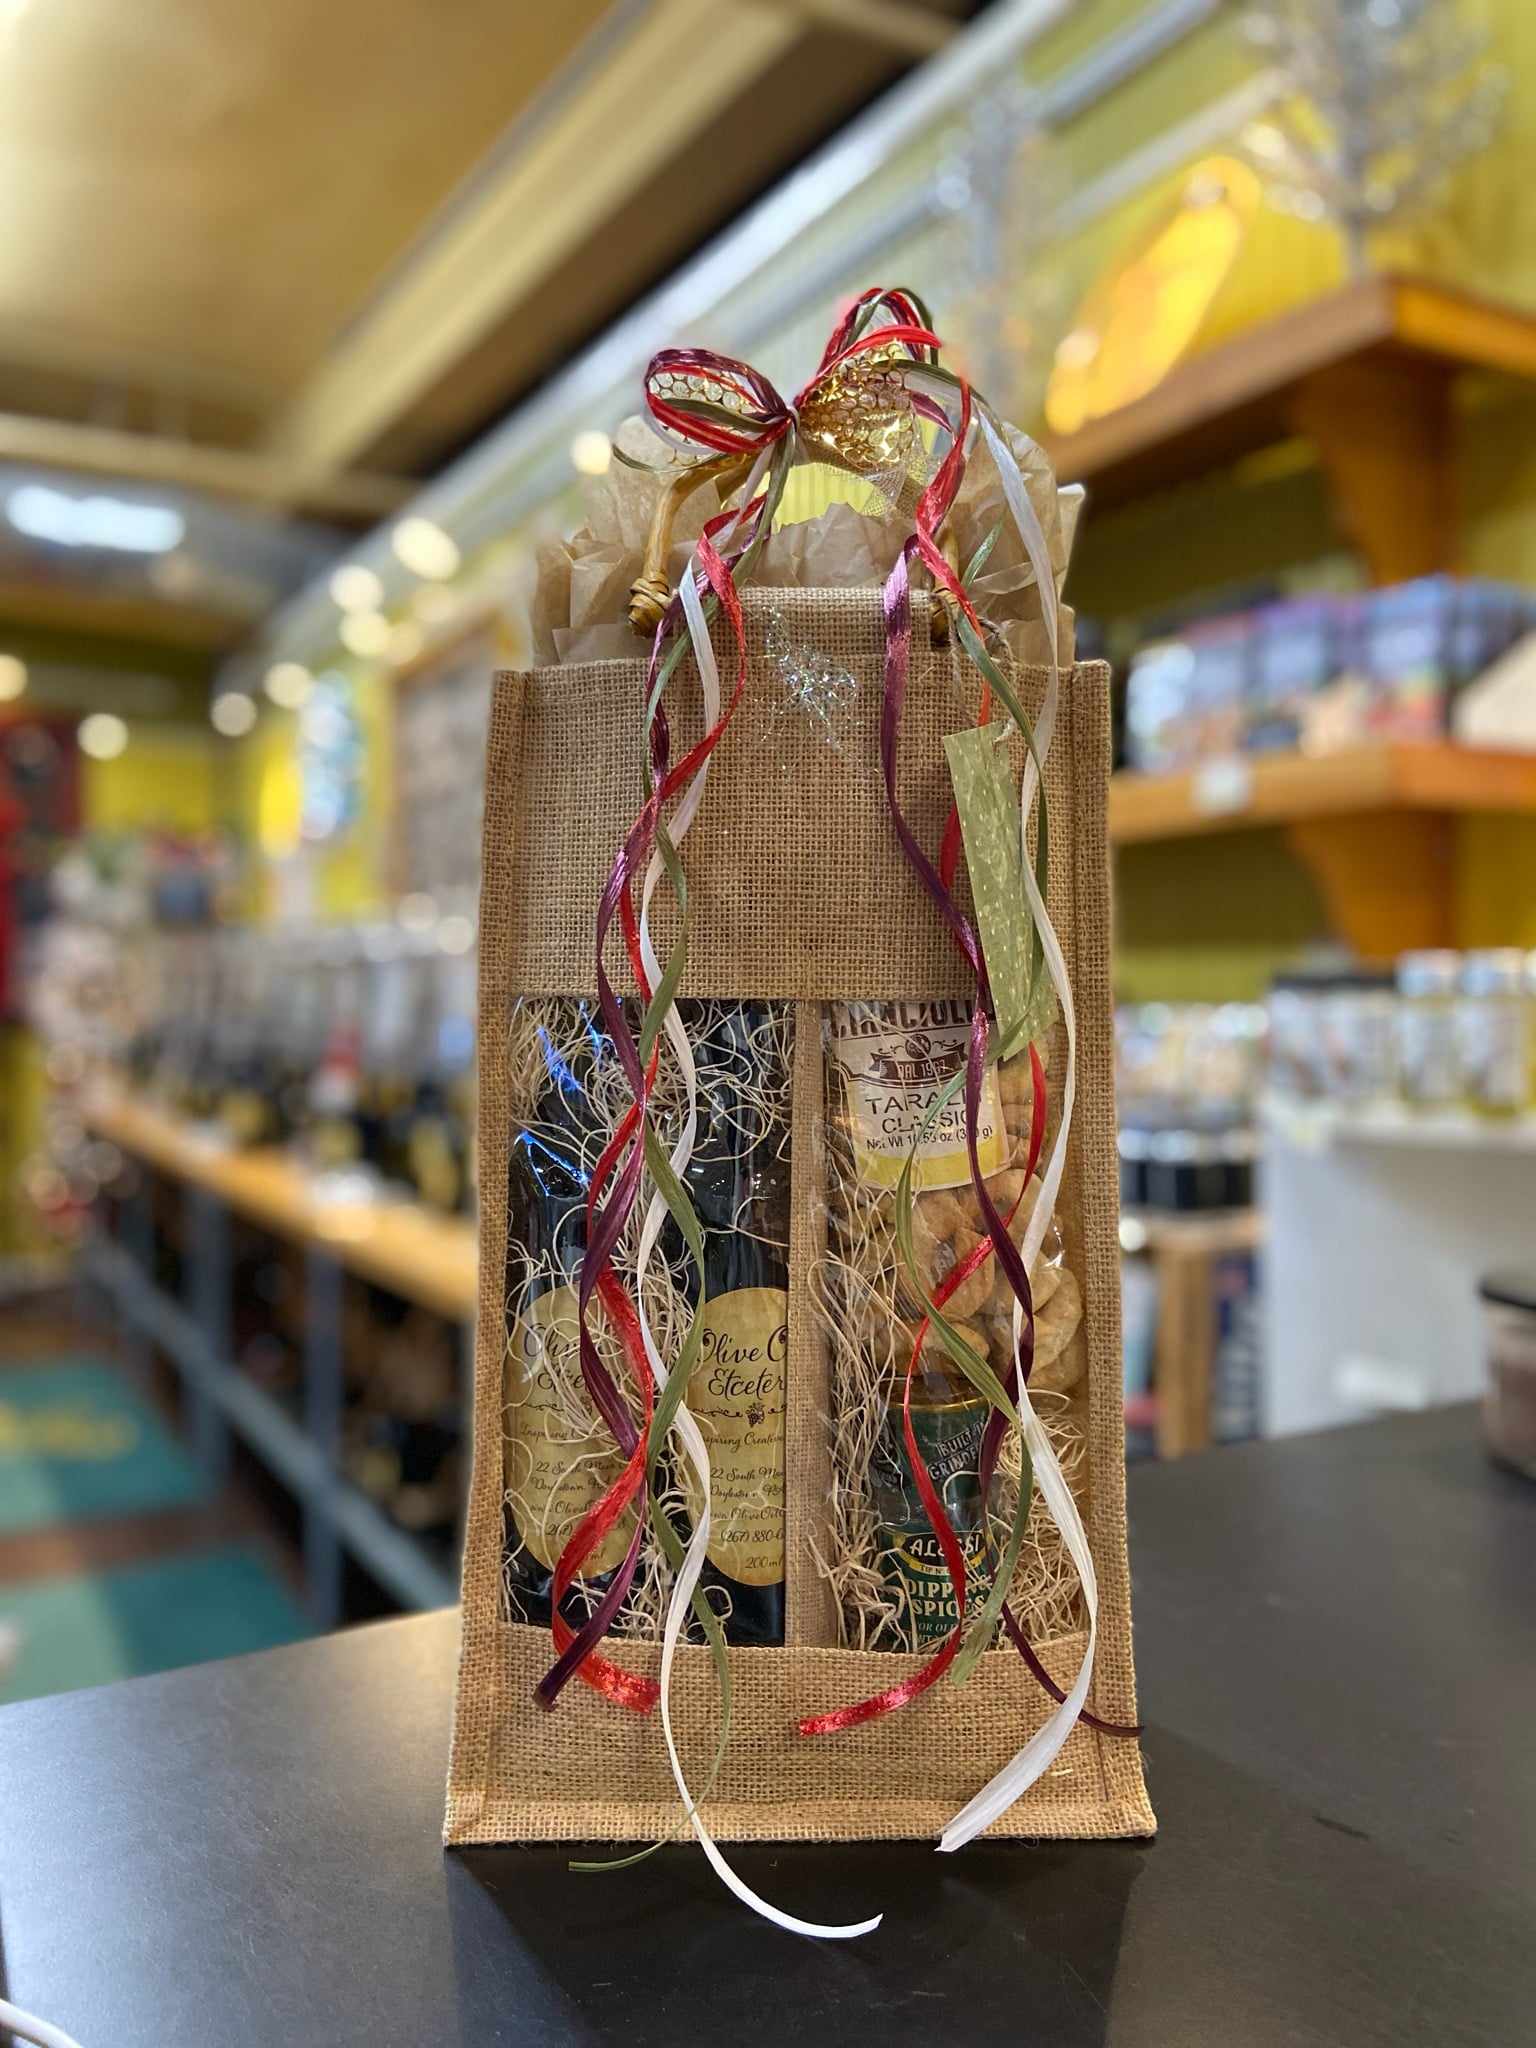 Burlap bag with olive oils & vinegars, crackers and dipping spice 